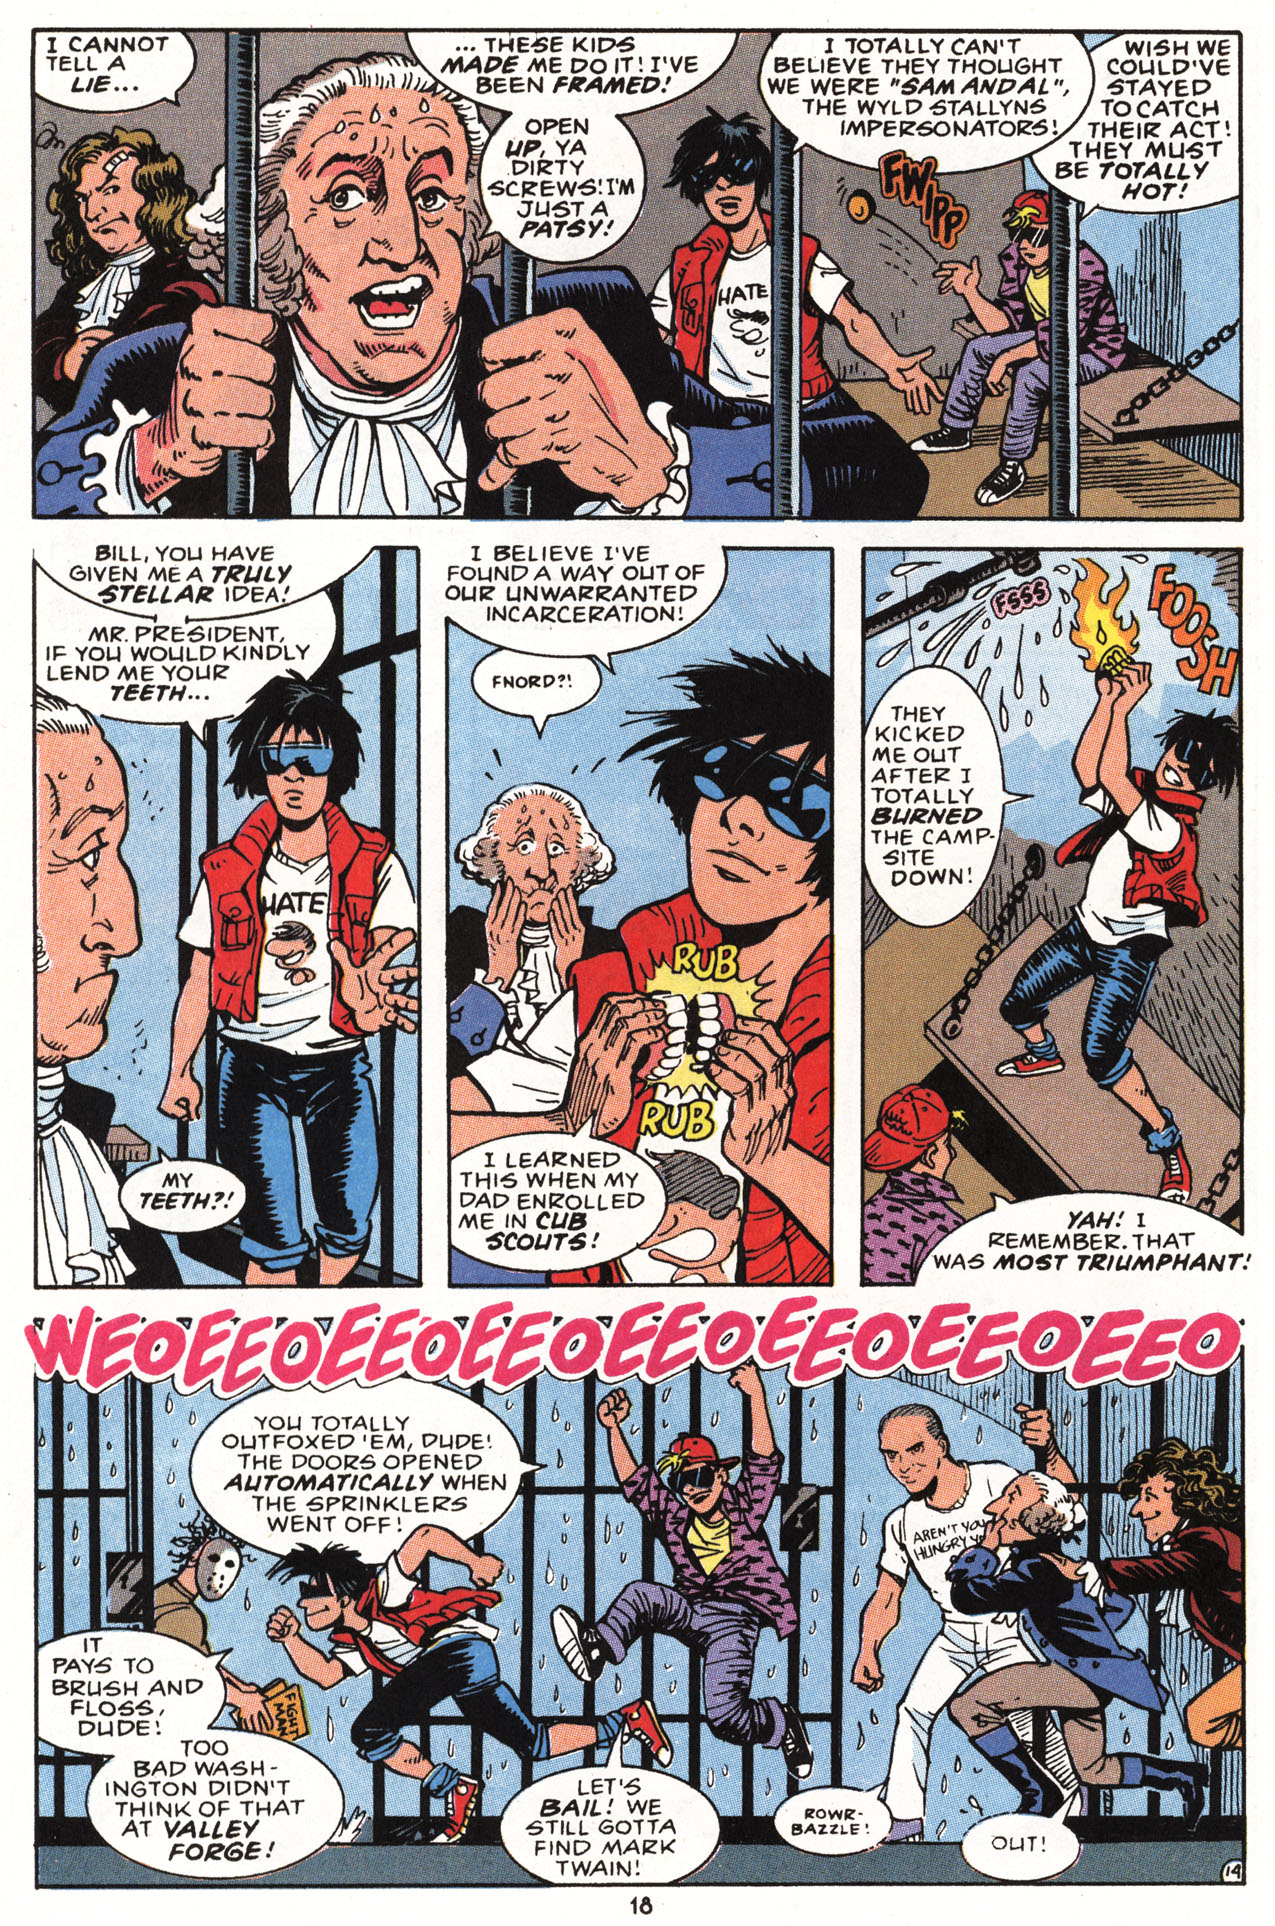 Read online Bill & Ted's Excellent Comic Book comic -  Issue #8 - 20